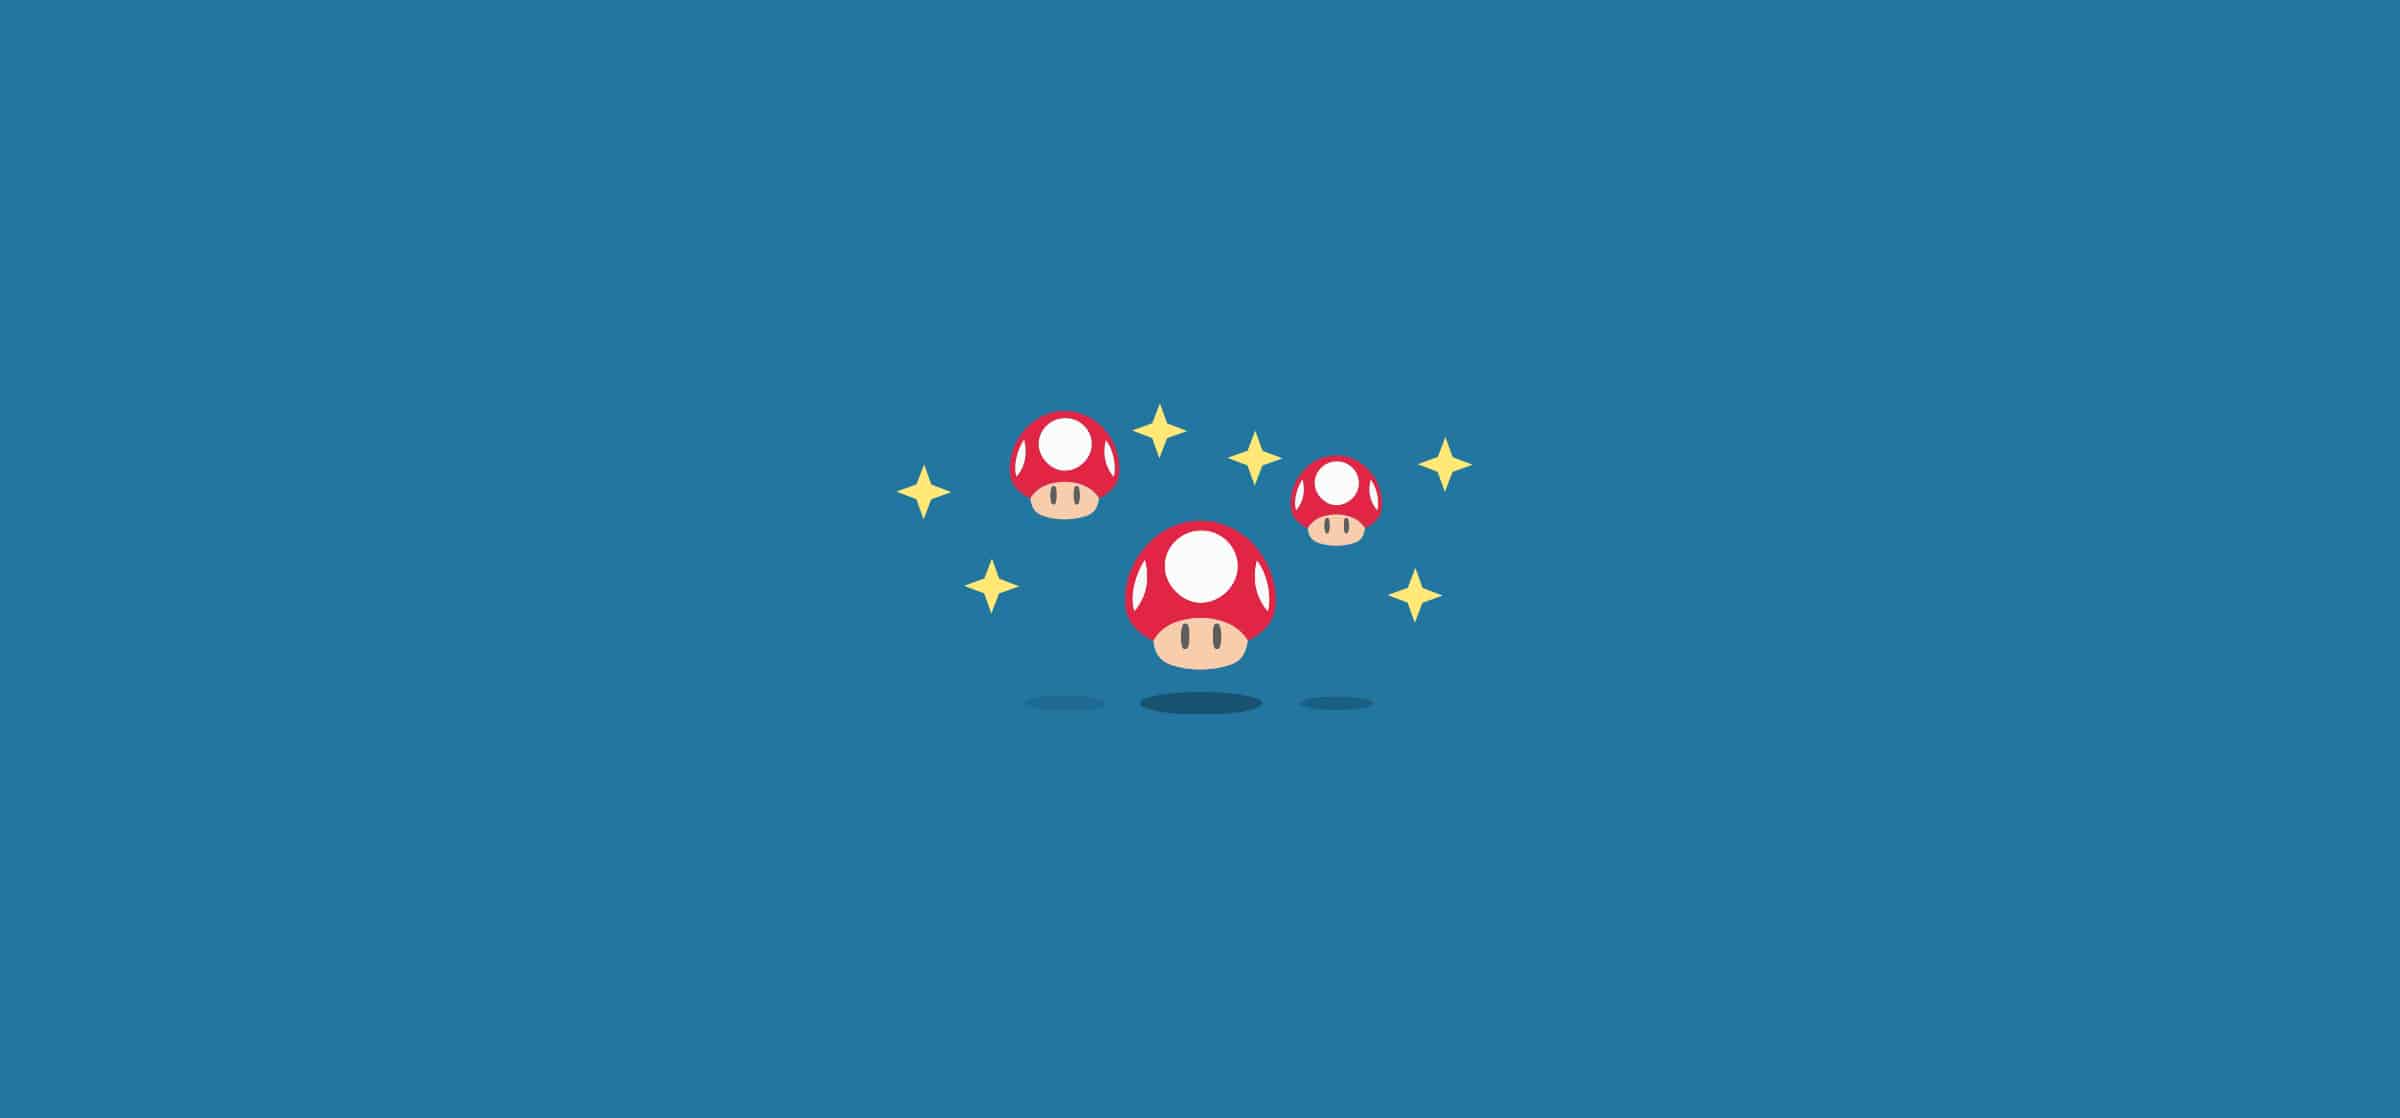 Red mushrooms from Mario Brothers, representing the best Trello Power-Ups